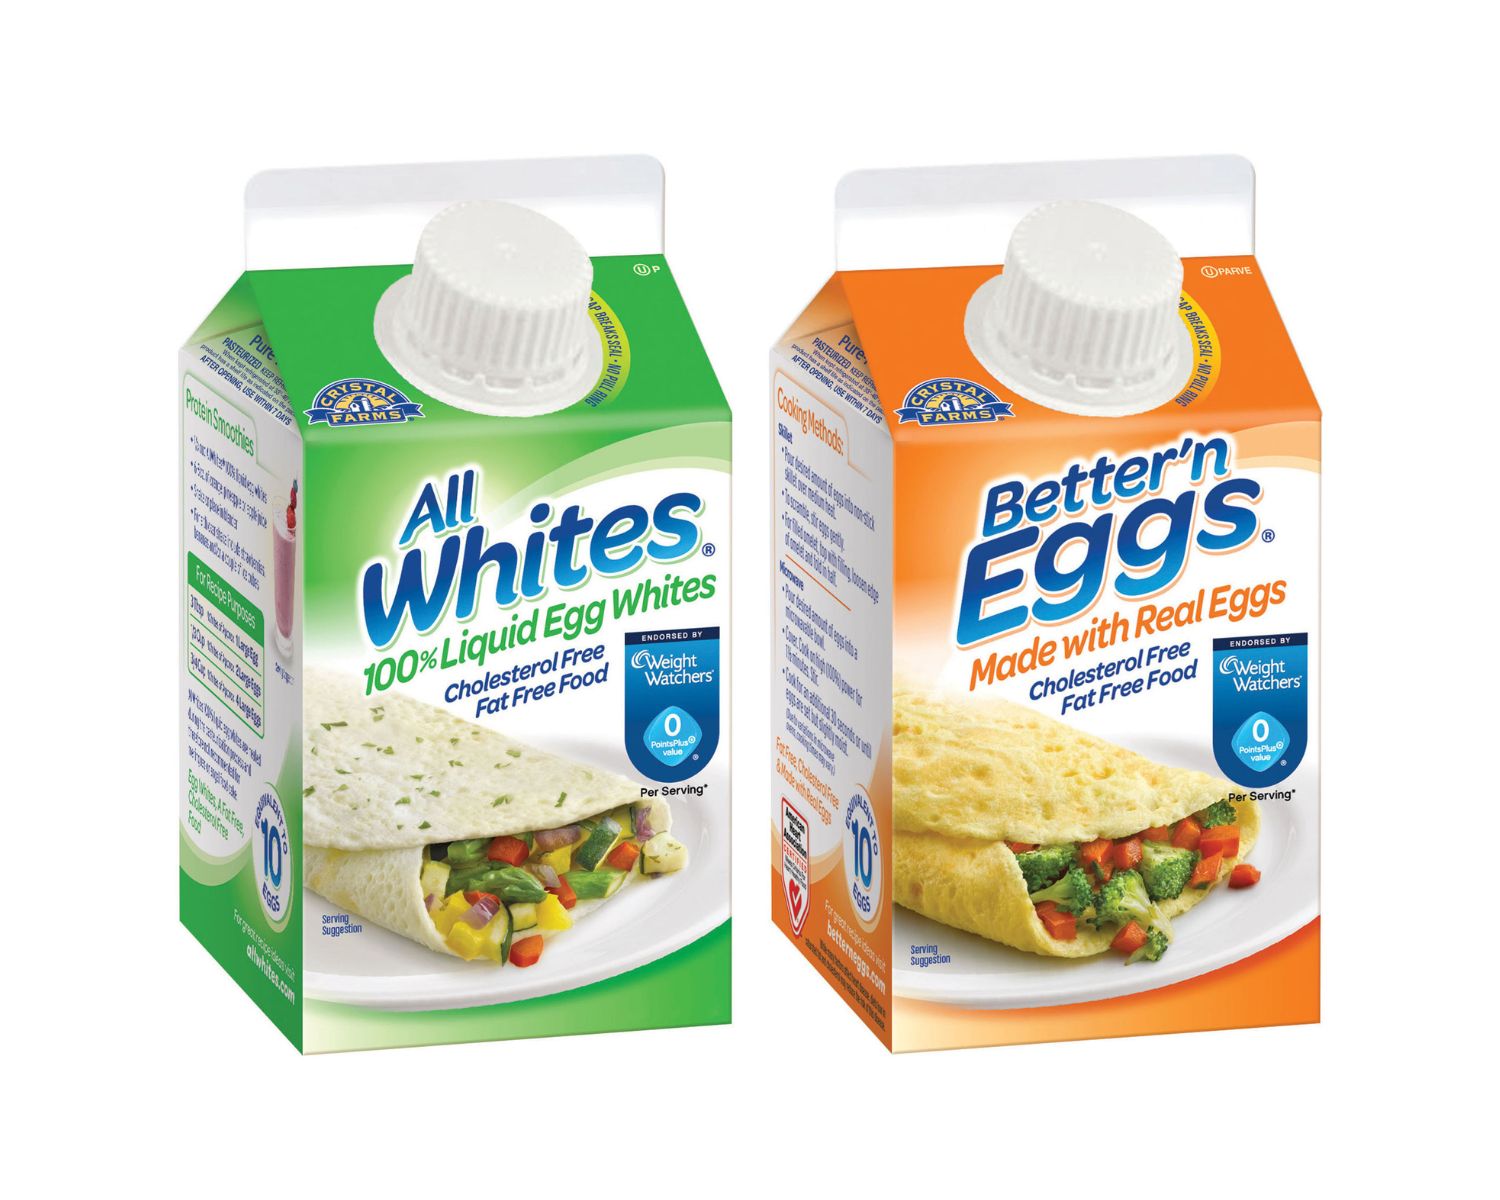 19-all-whites-nutrition-facts